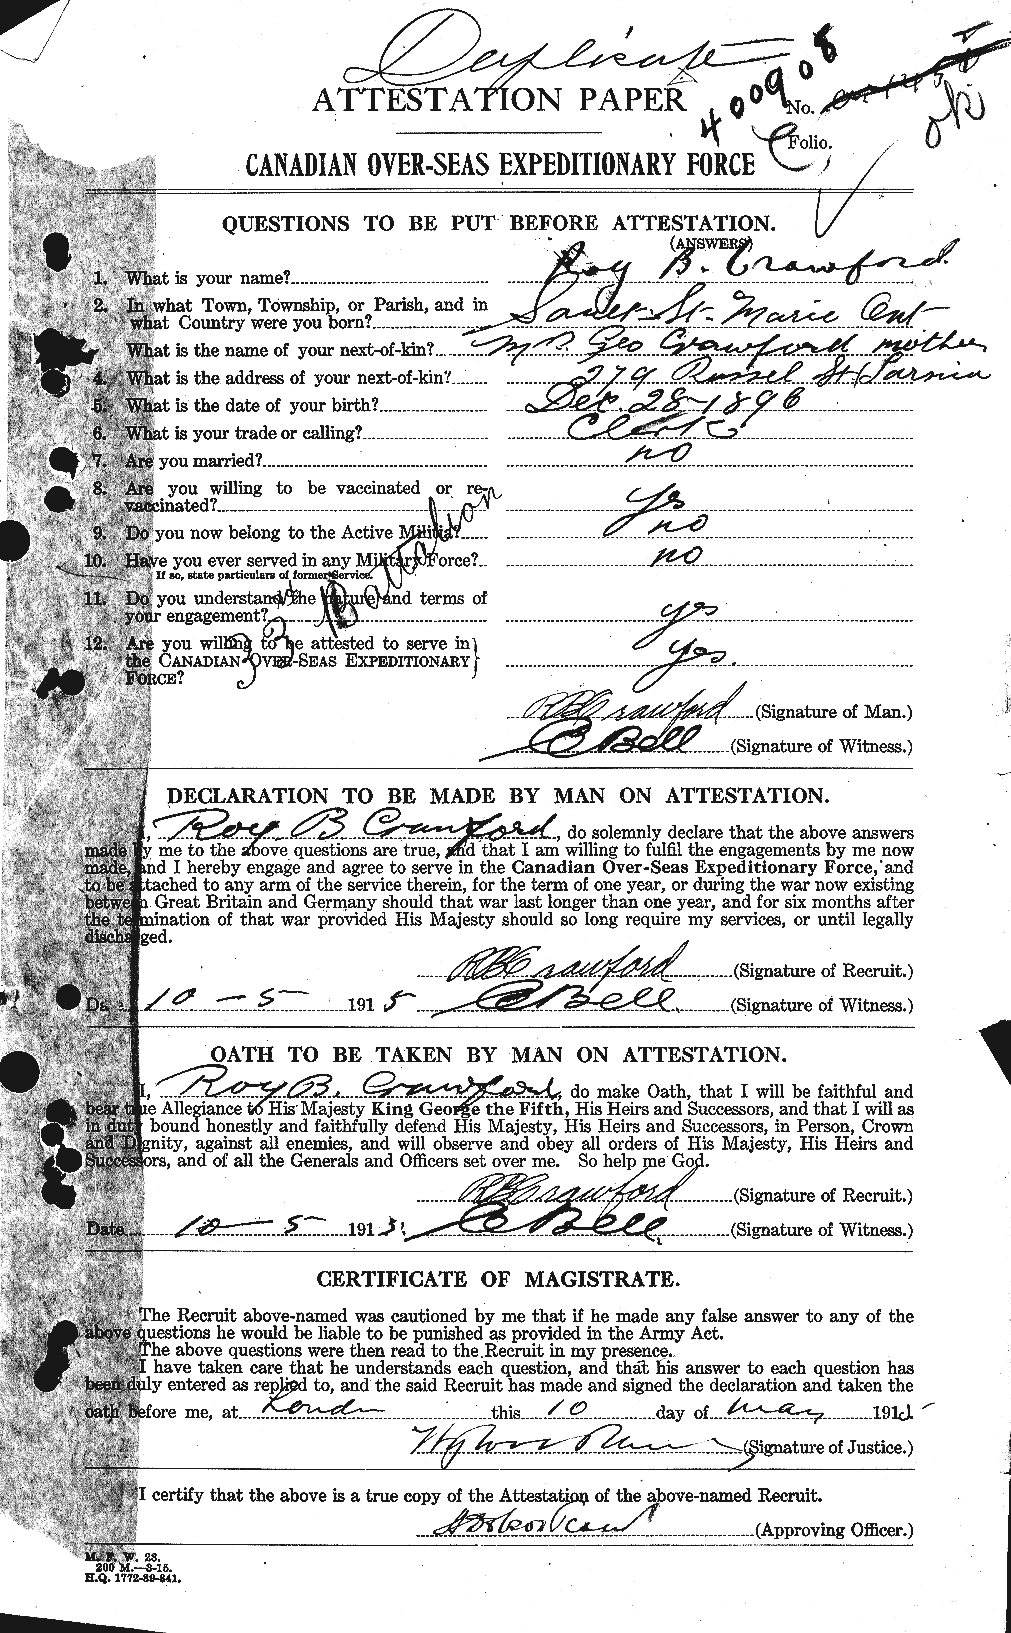 Personnel Records of the First World War - CEF 061387a